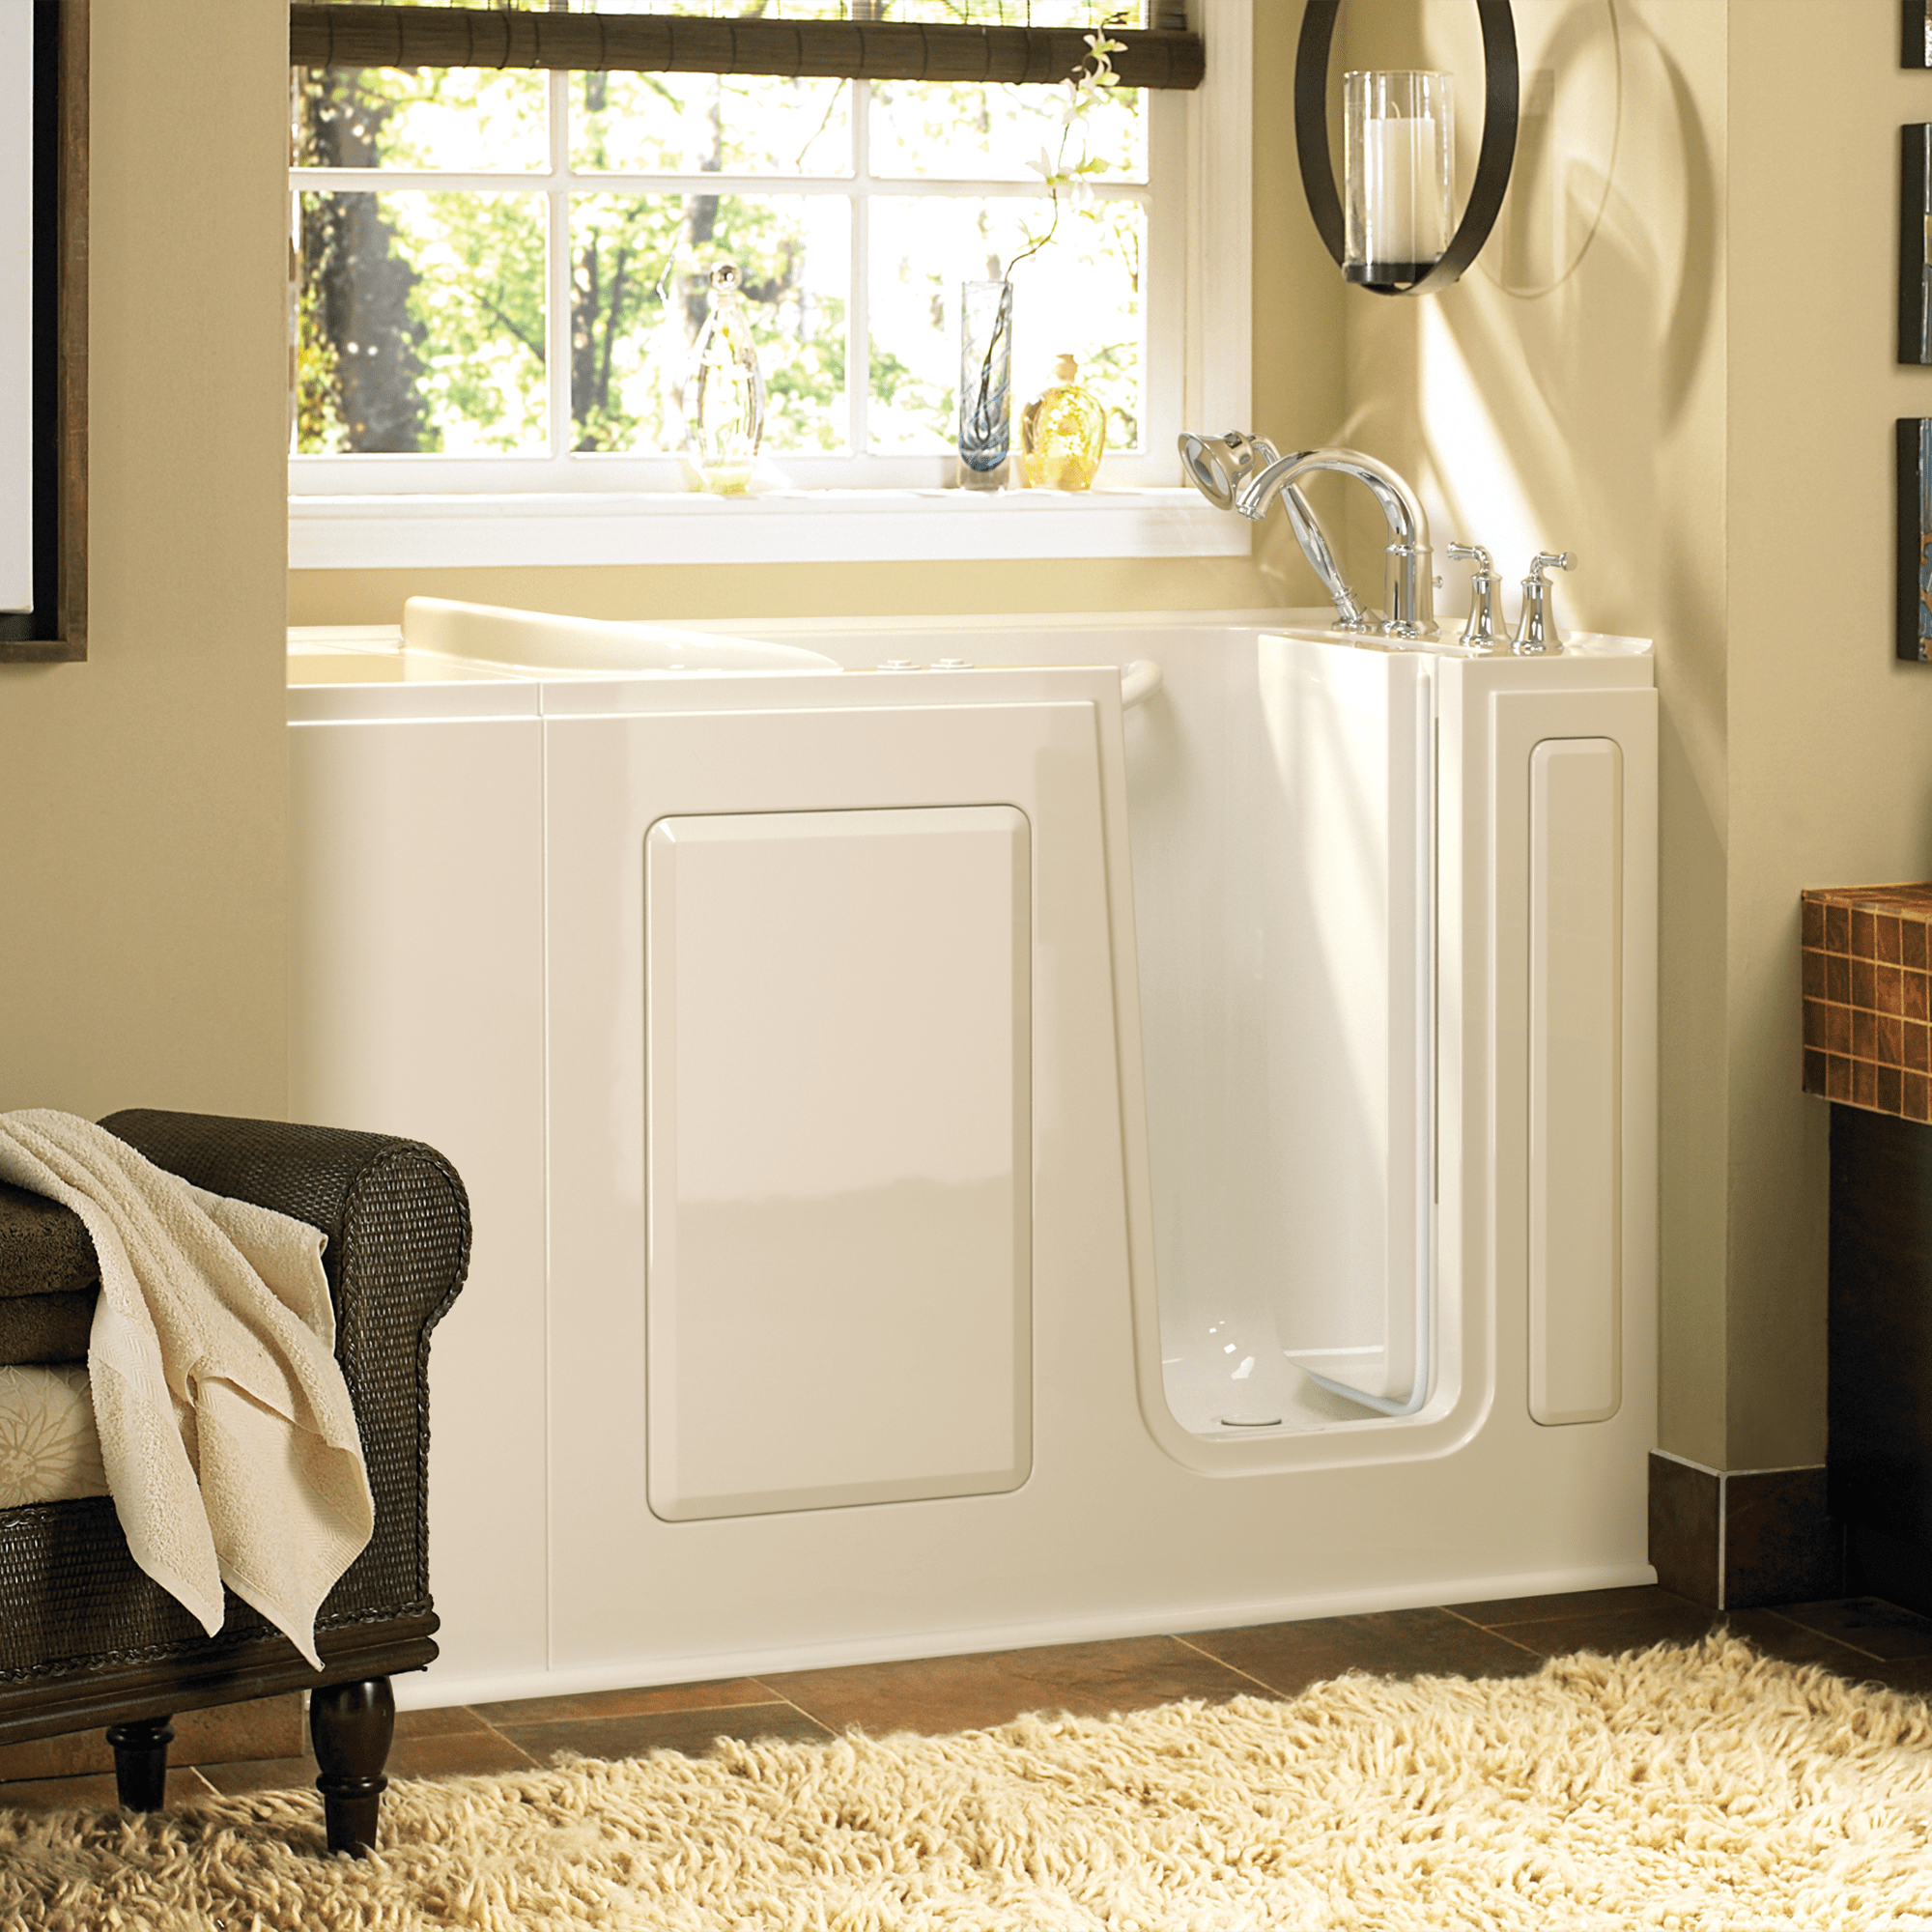 Gelcoat Value Series 28 x 48-Inch Walk-in Tub With Whirlpool System - Right-Hand Drain With Faucet